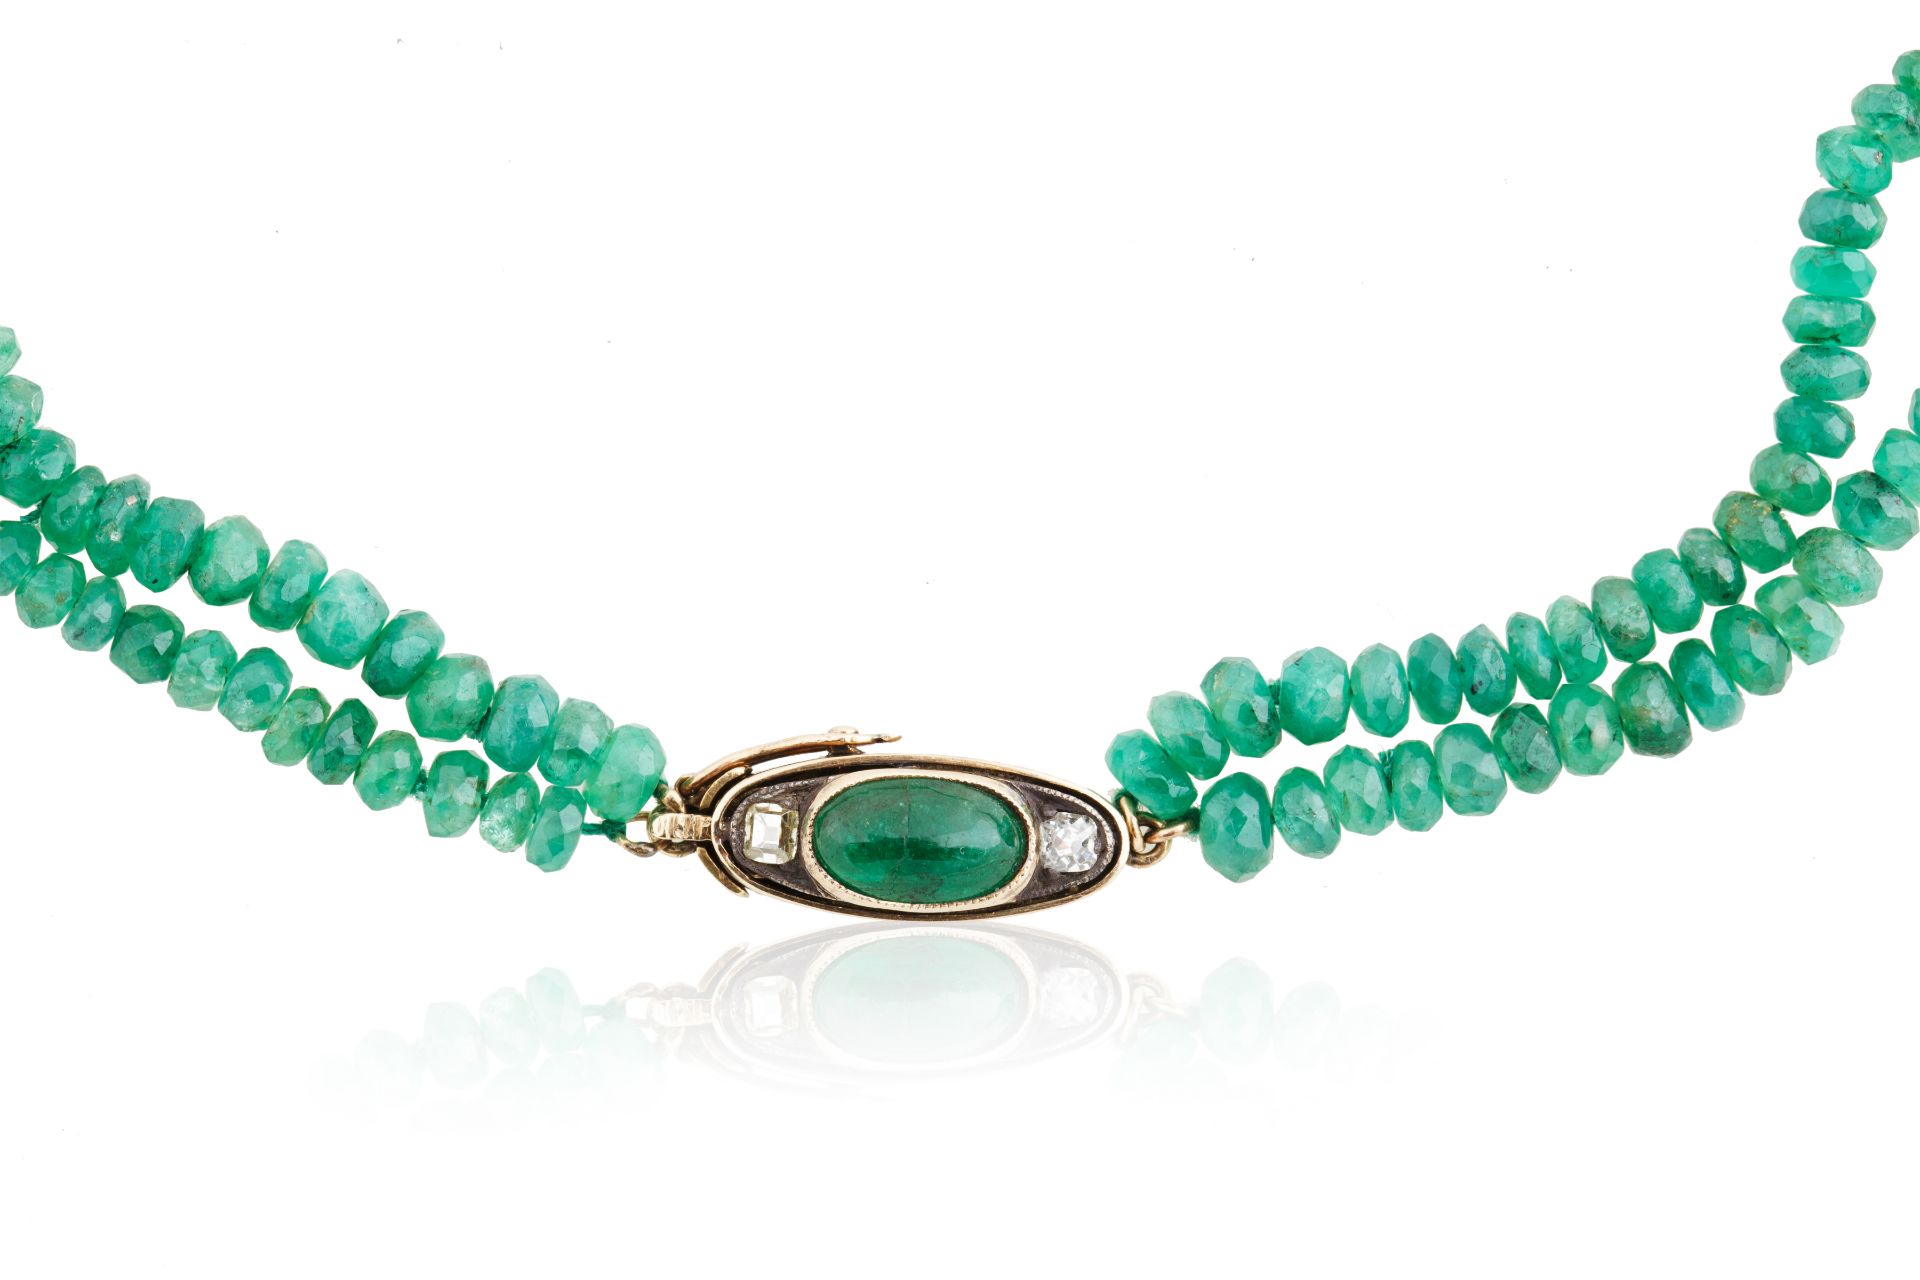 AN EMERALD, DIAMOND AND JADEITE BEADED NECKLACE, LIKELY FRENCH - Image 2 of 5